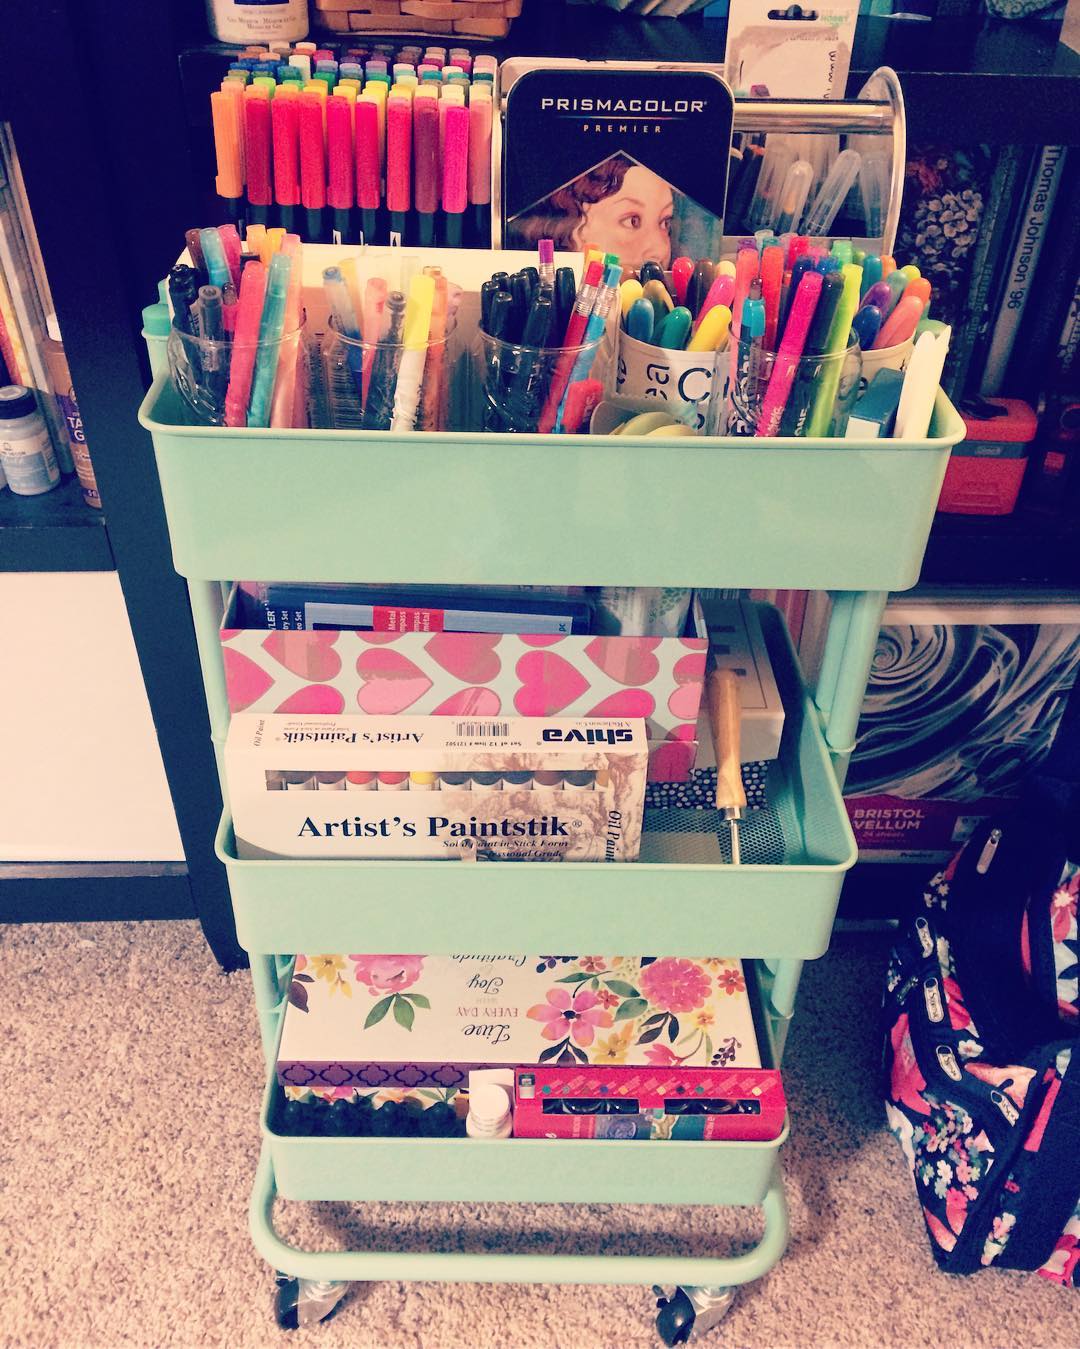 rolling cart holding art supplies that can move around photo by Instagram user @calleygirl80